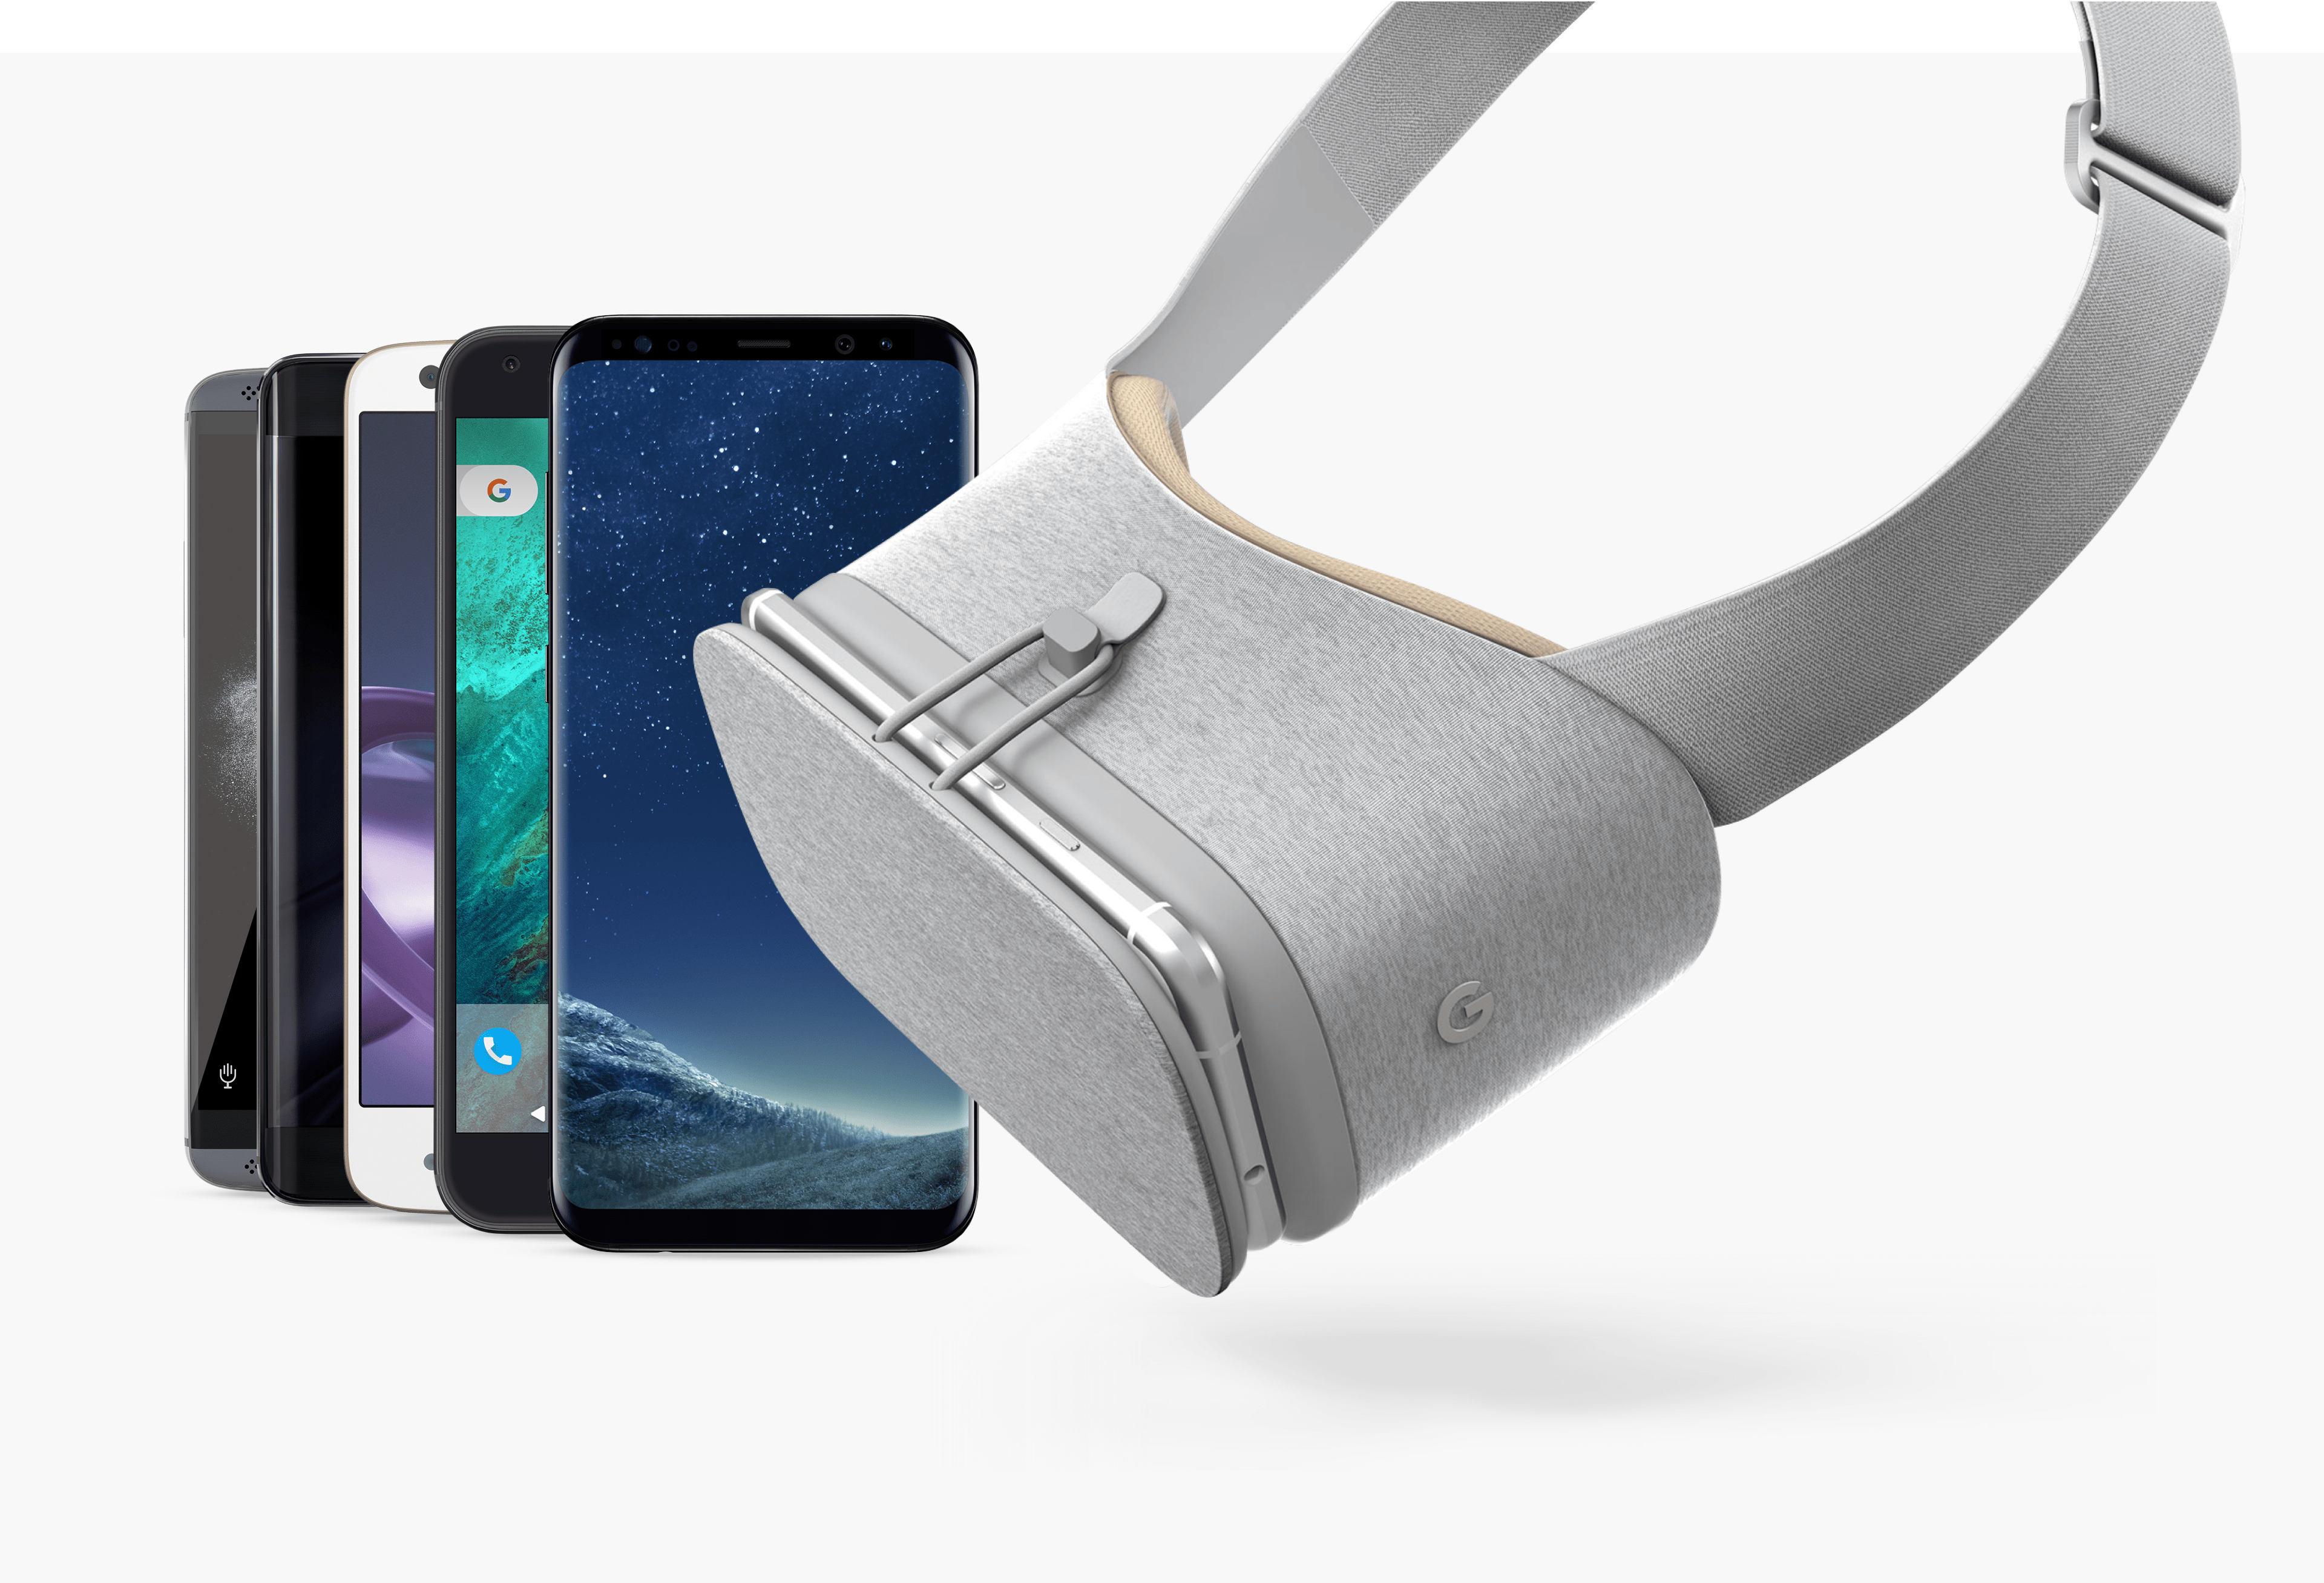 vr supported samsung mobiles